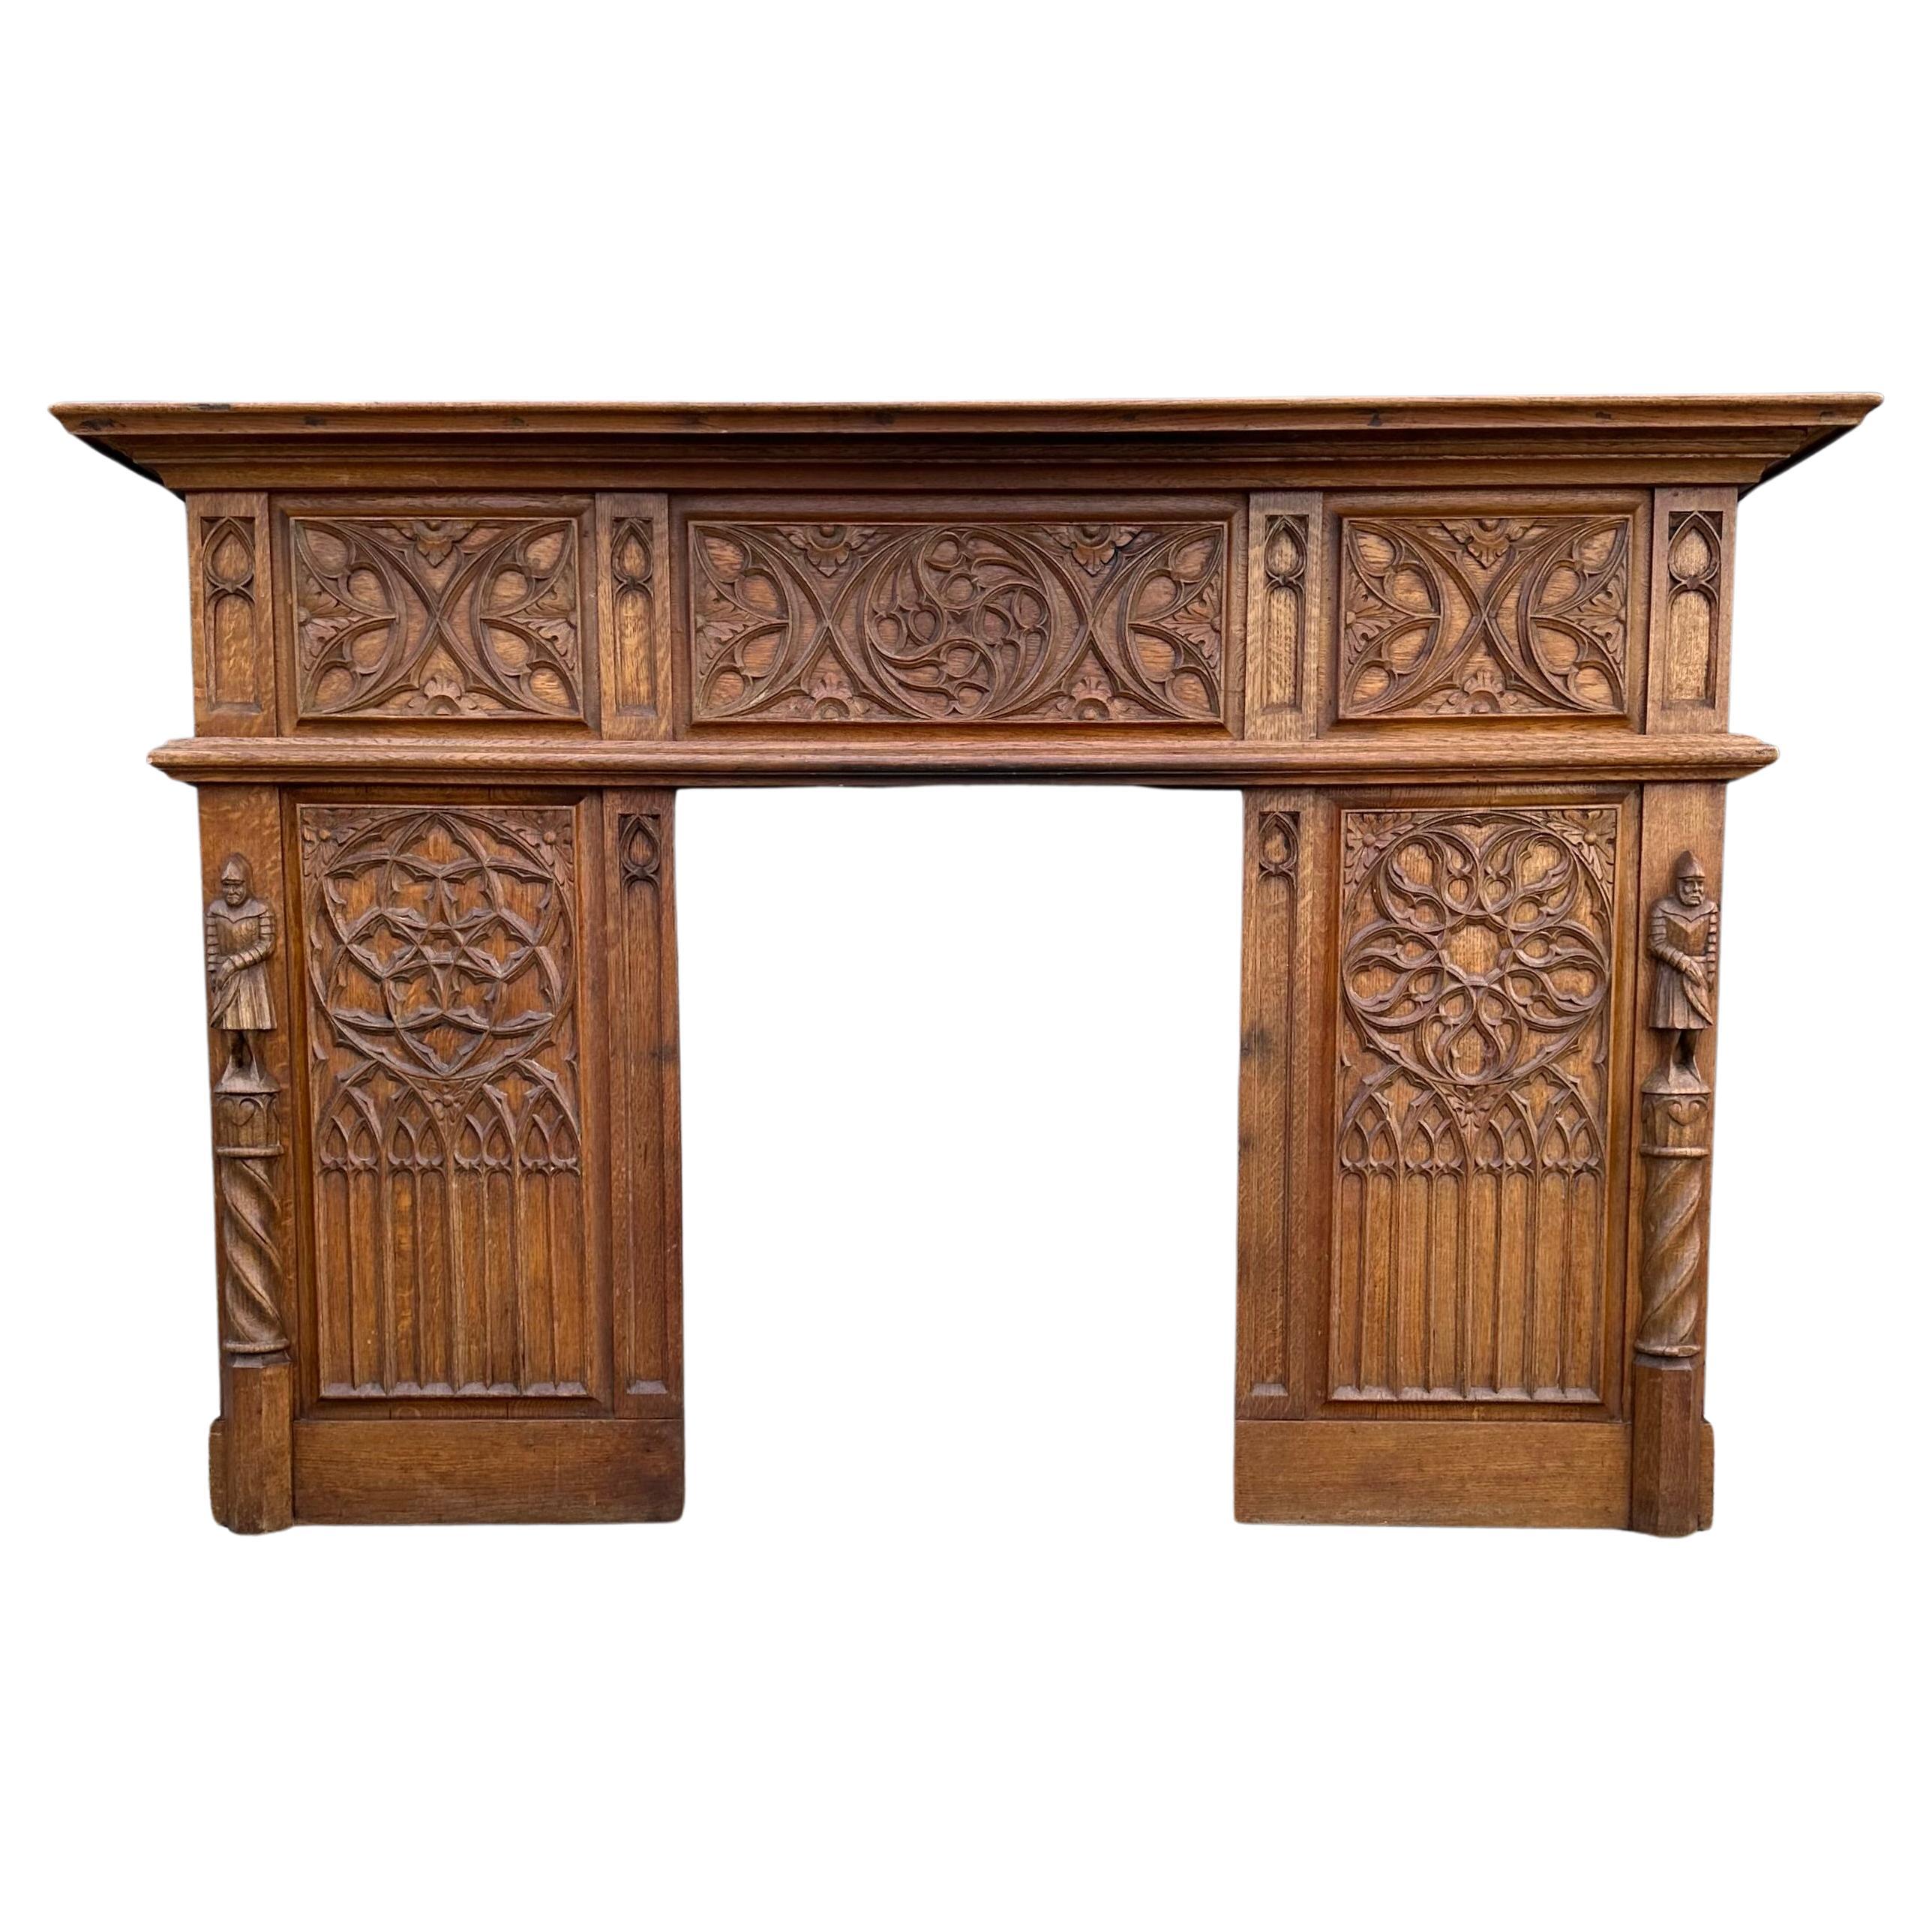 Gothic Revival Oak Fireplace Mantel with Carved Church Window Panels & Guards